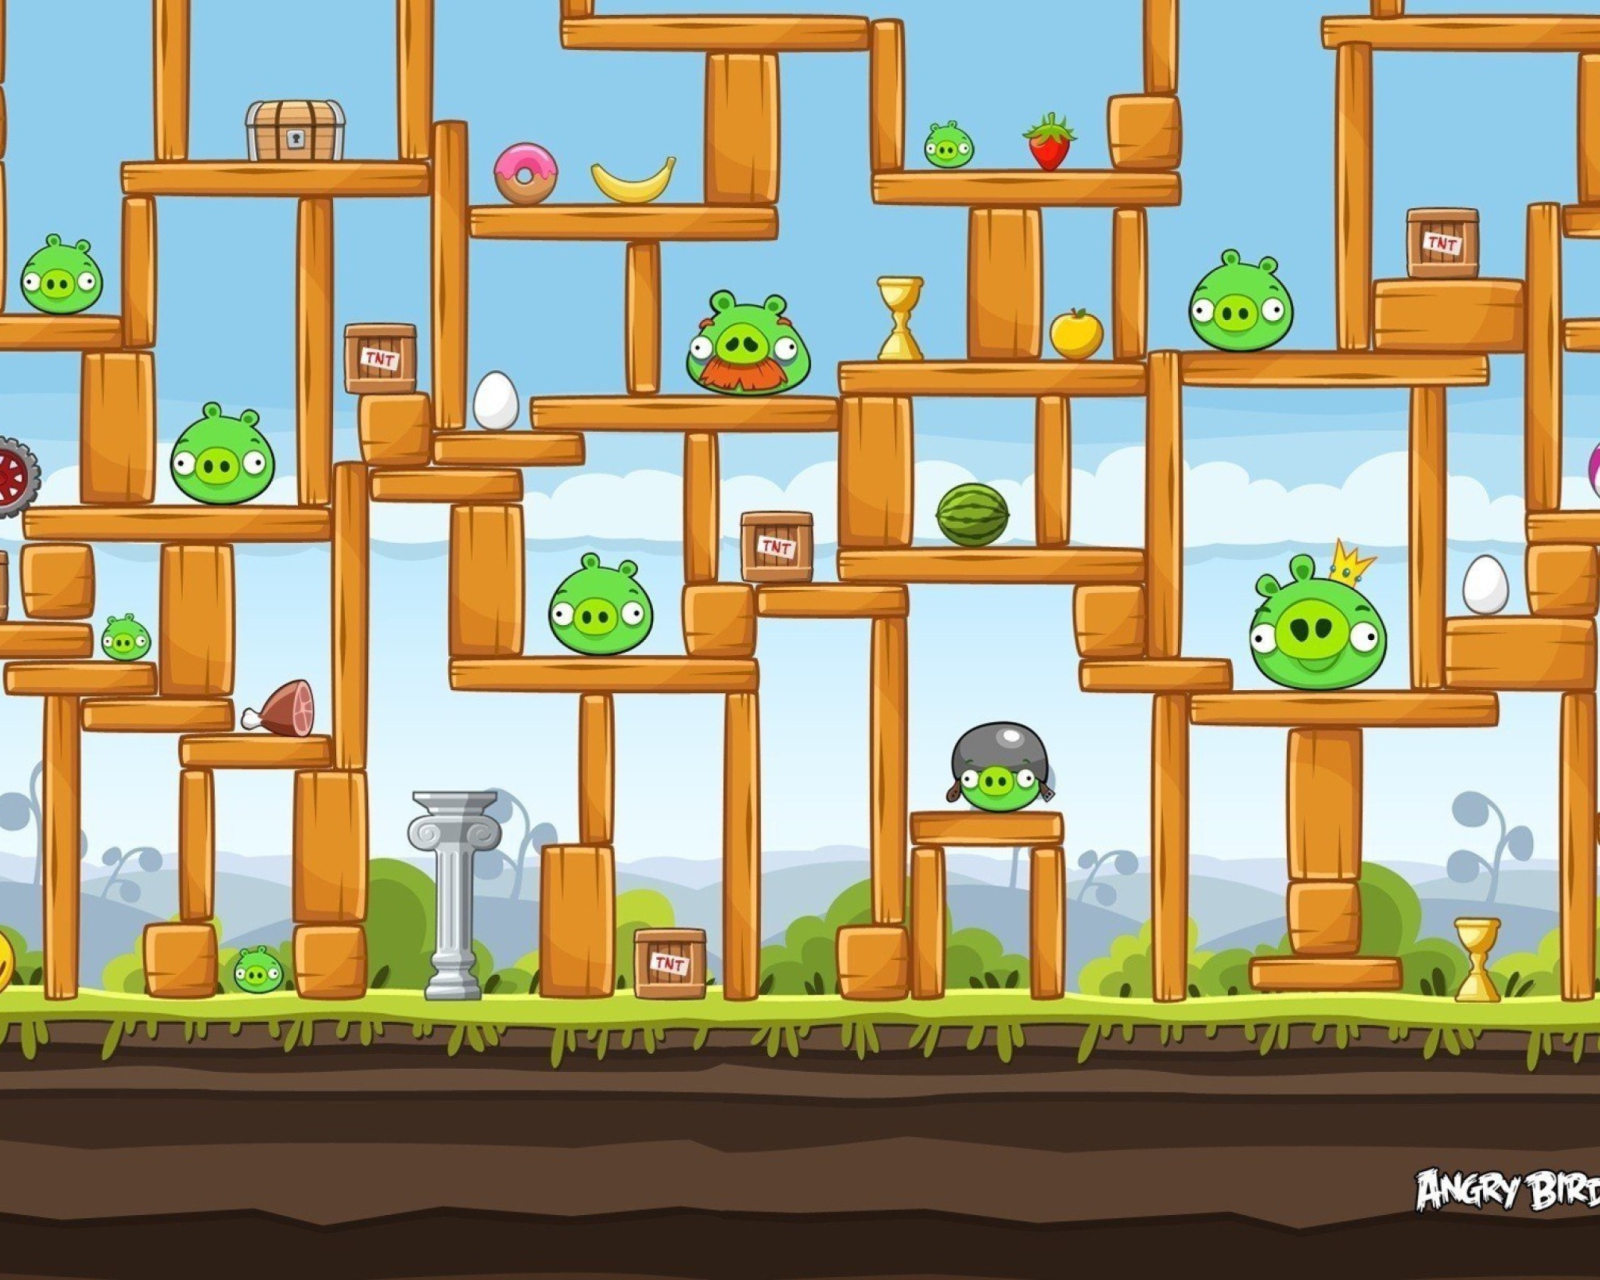 Angry Birds wallpaper 1600x1280